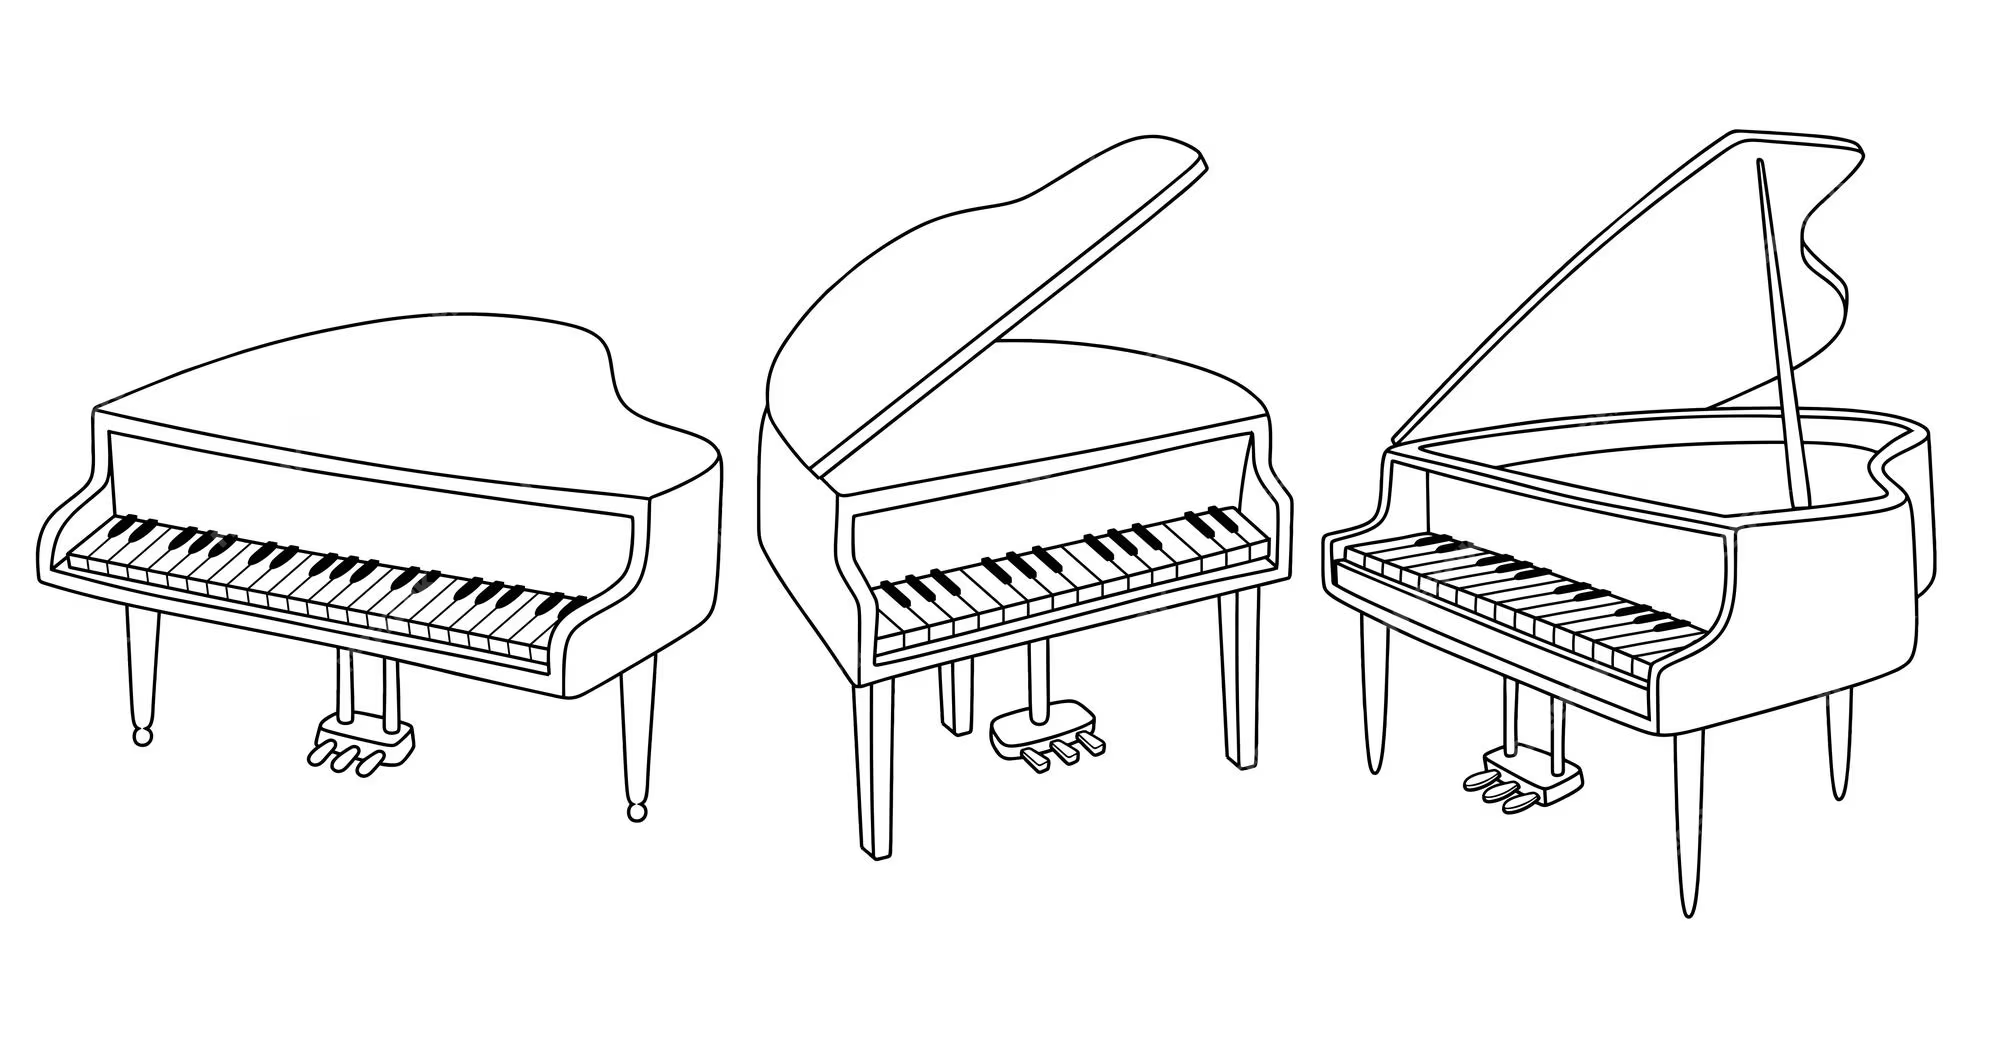 Line drawing of three pianos